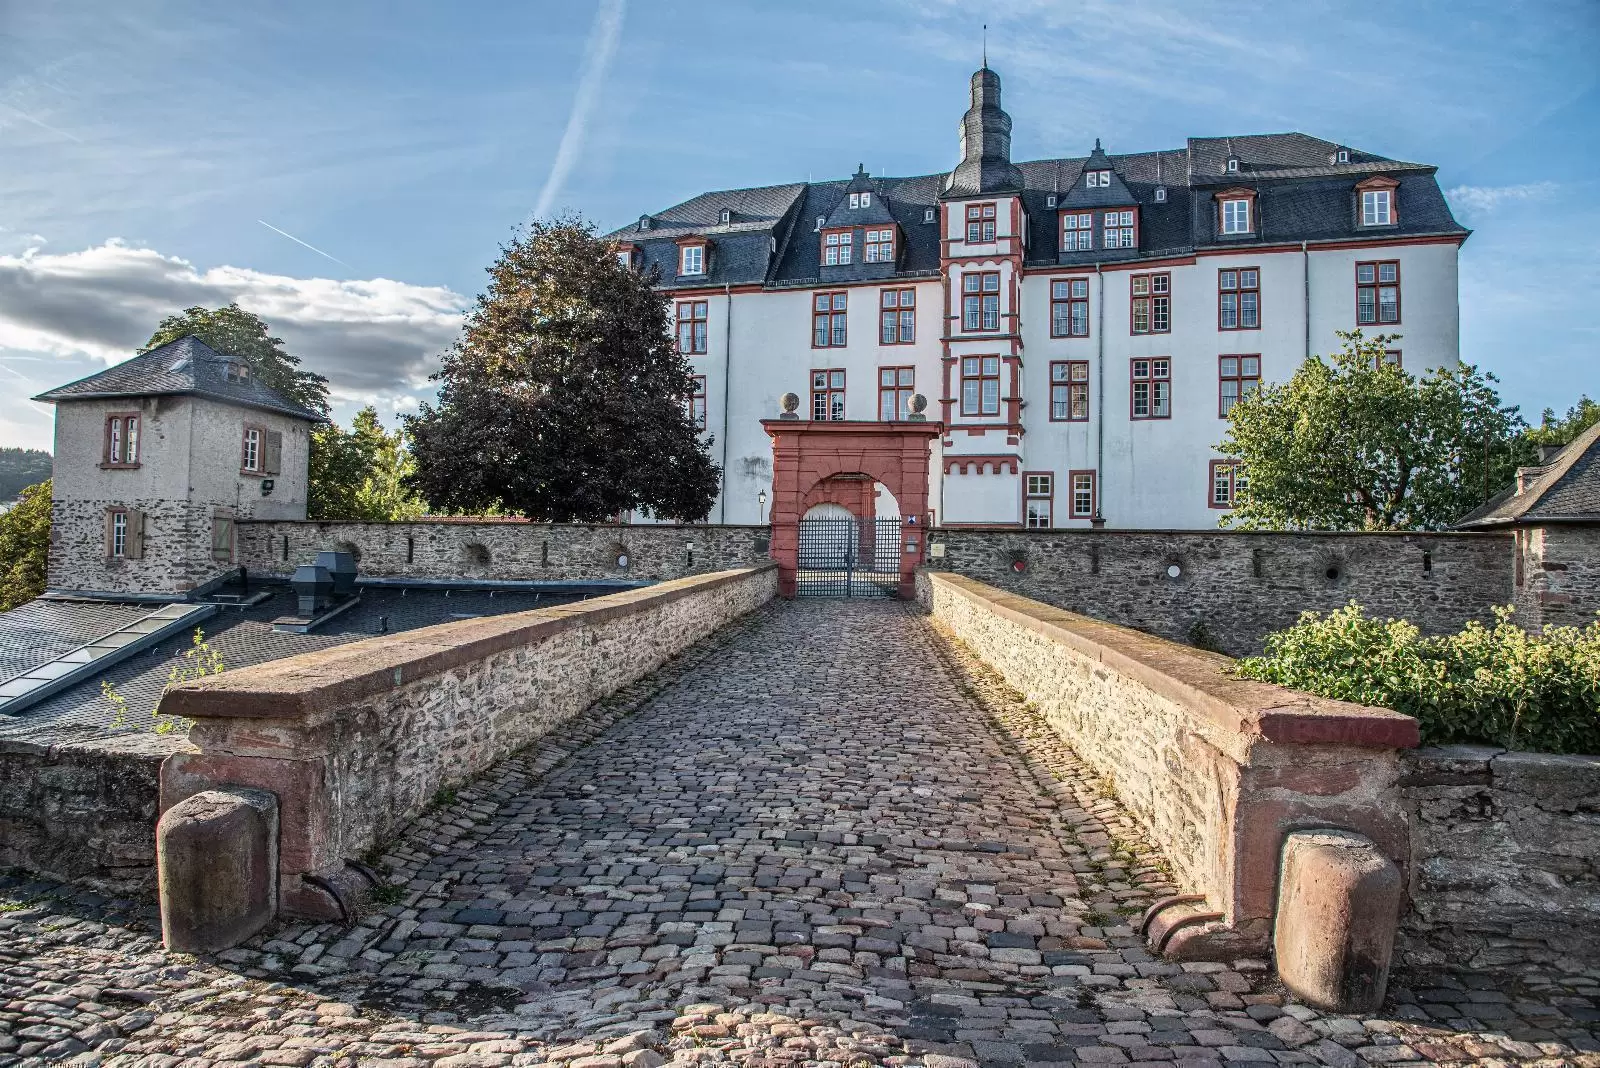 Idstein Residential Palace